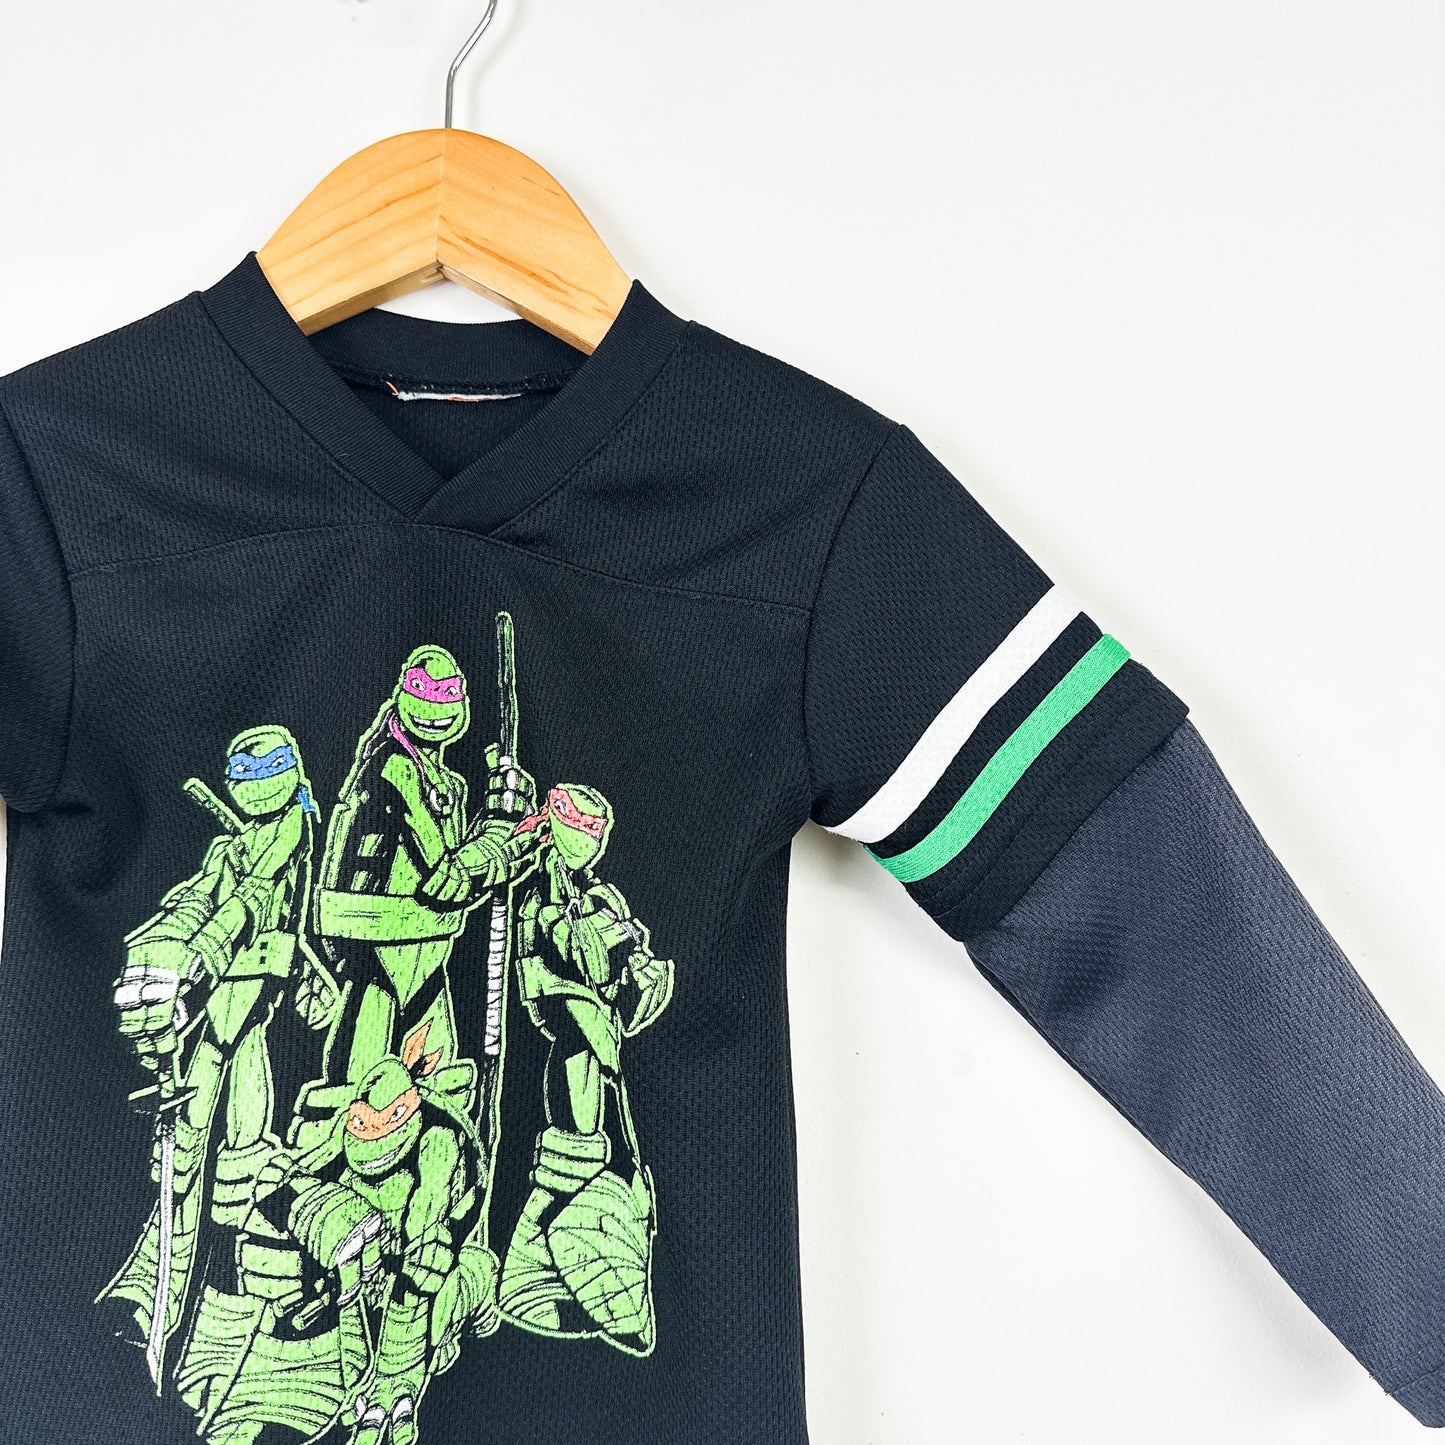 Vintage TNMT Long Sleeve Jersey - Size 2T